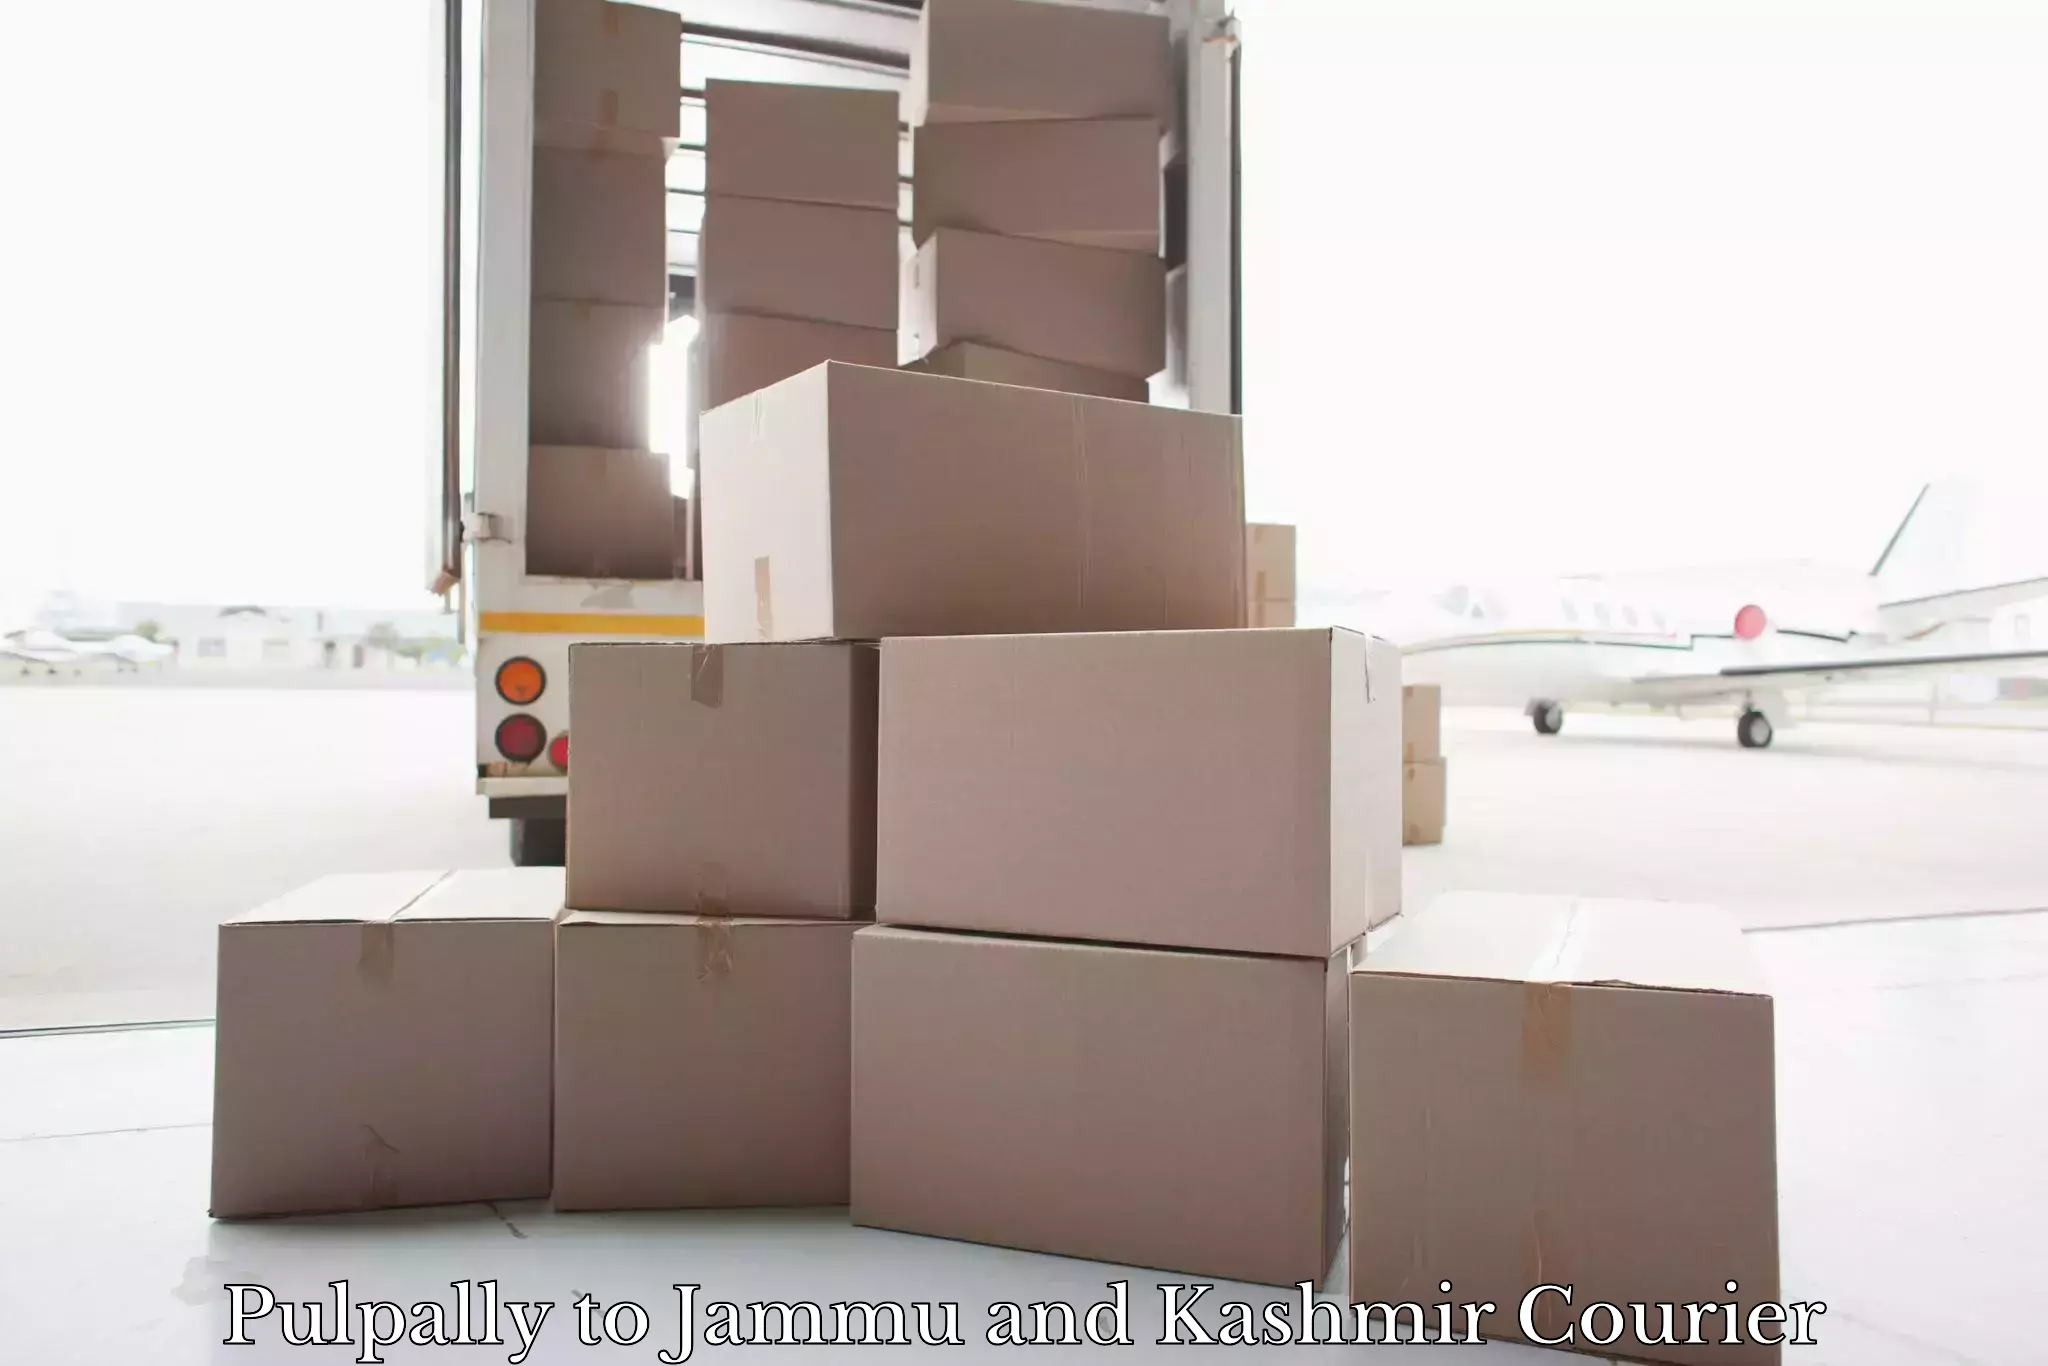 Efficient baggage transport Pulpally to Jammu and Kashmir